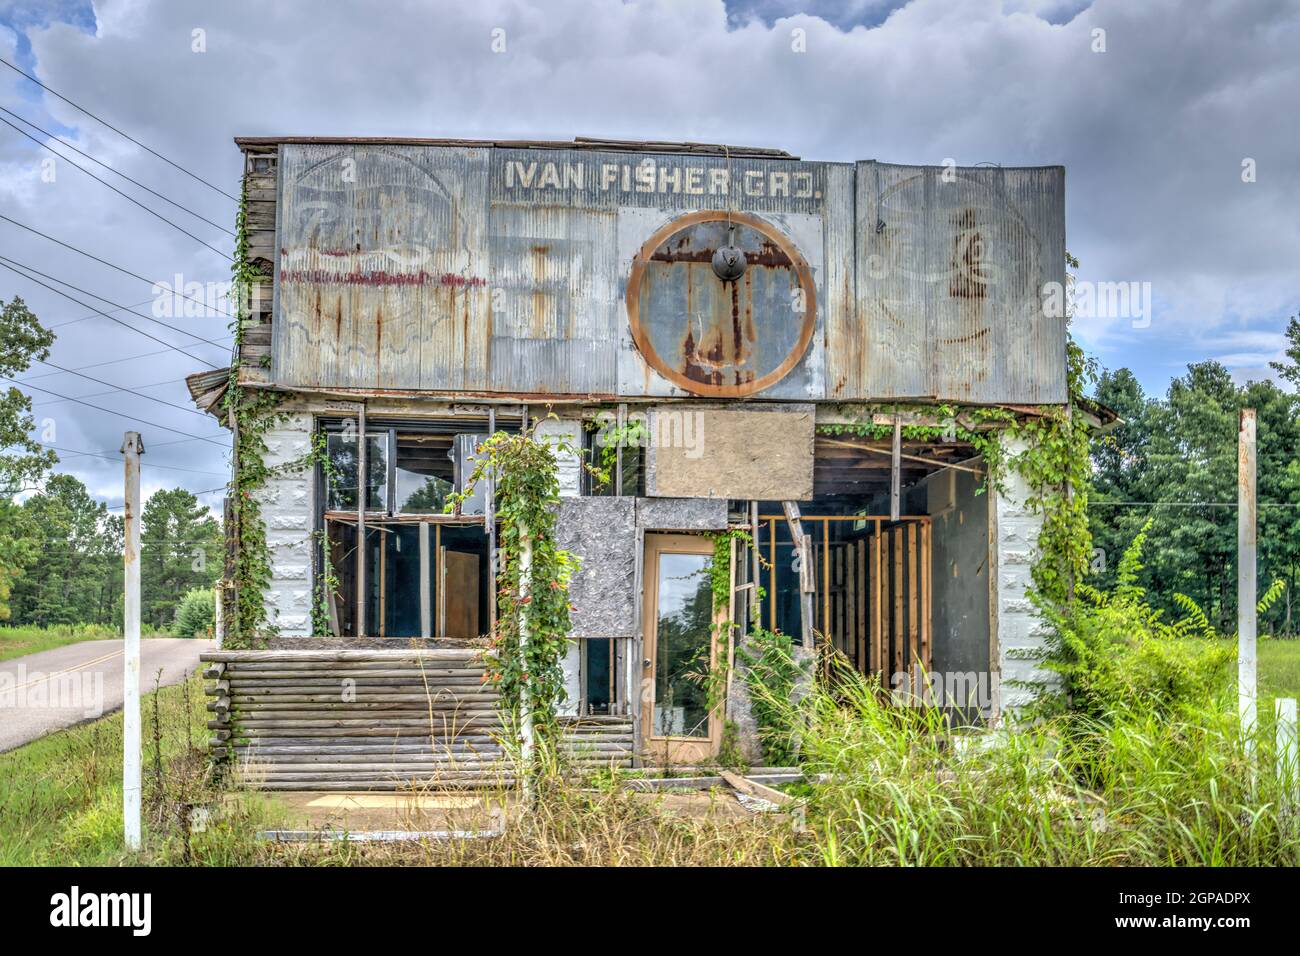 https://c8.alamy.com/comp/2GPADPX/an-abandoned-general-store-on-highway-22-in-michie-tennesse-2GPADPX.jpg